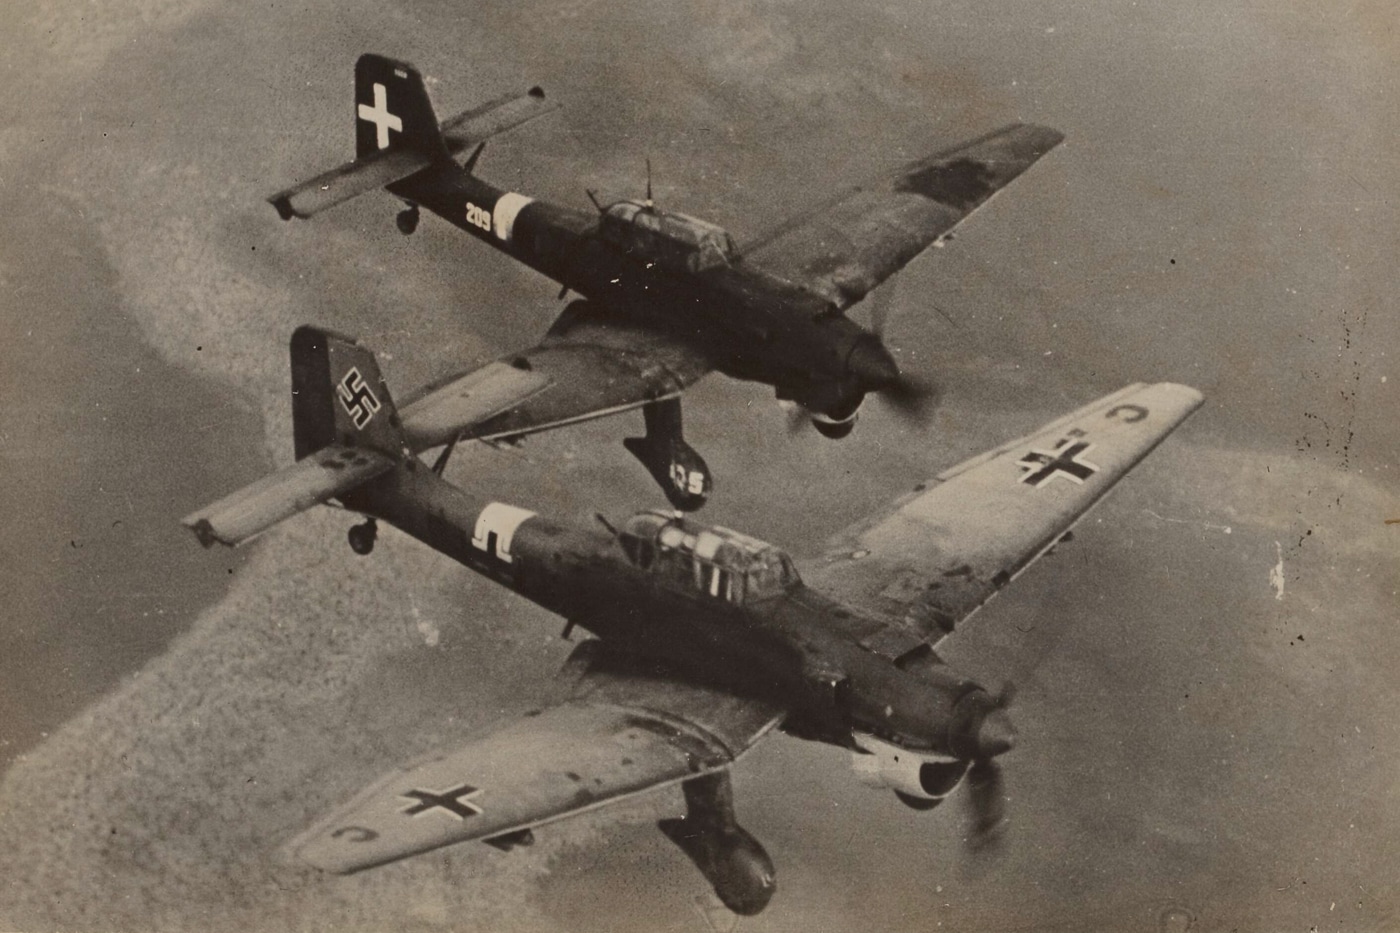 In this photo we see an Fascist Italy Air Force Stuka flying in formation with a Nazi Germany Stuka. The Italian Air Force is the air force of the Italian Republic. The Italian Air Force was founded as an independent service arm on 28 March 1923 by King Victor Emmanuel III as the Regia Aeronautica. The Kingdom of Italy was governed by the National Fascist Party from 1922 to 1943 with Benito Mussolini as prime minister and dictator.